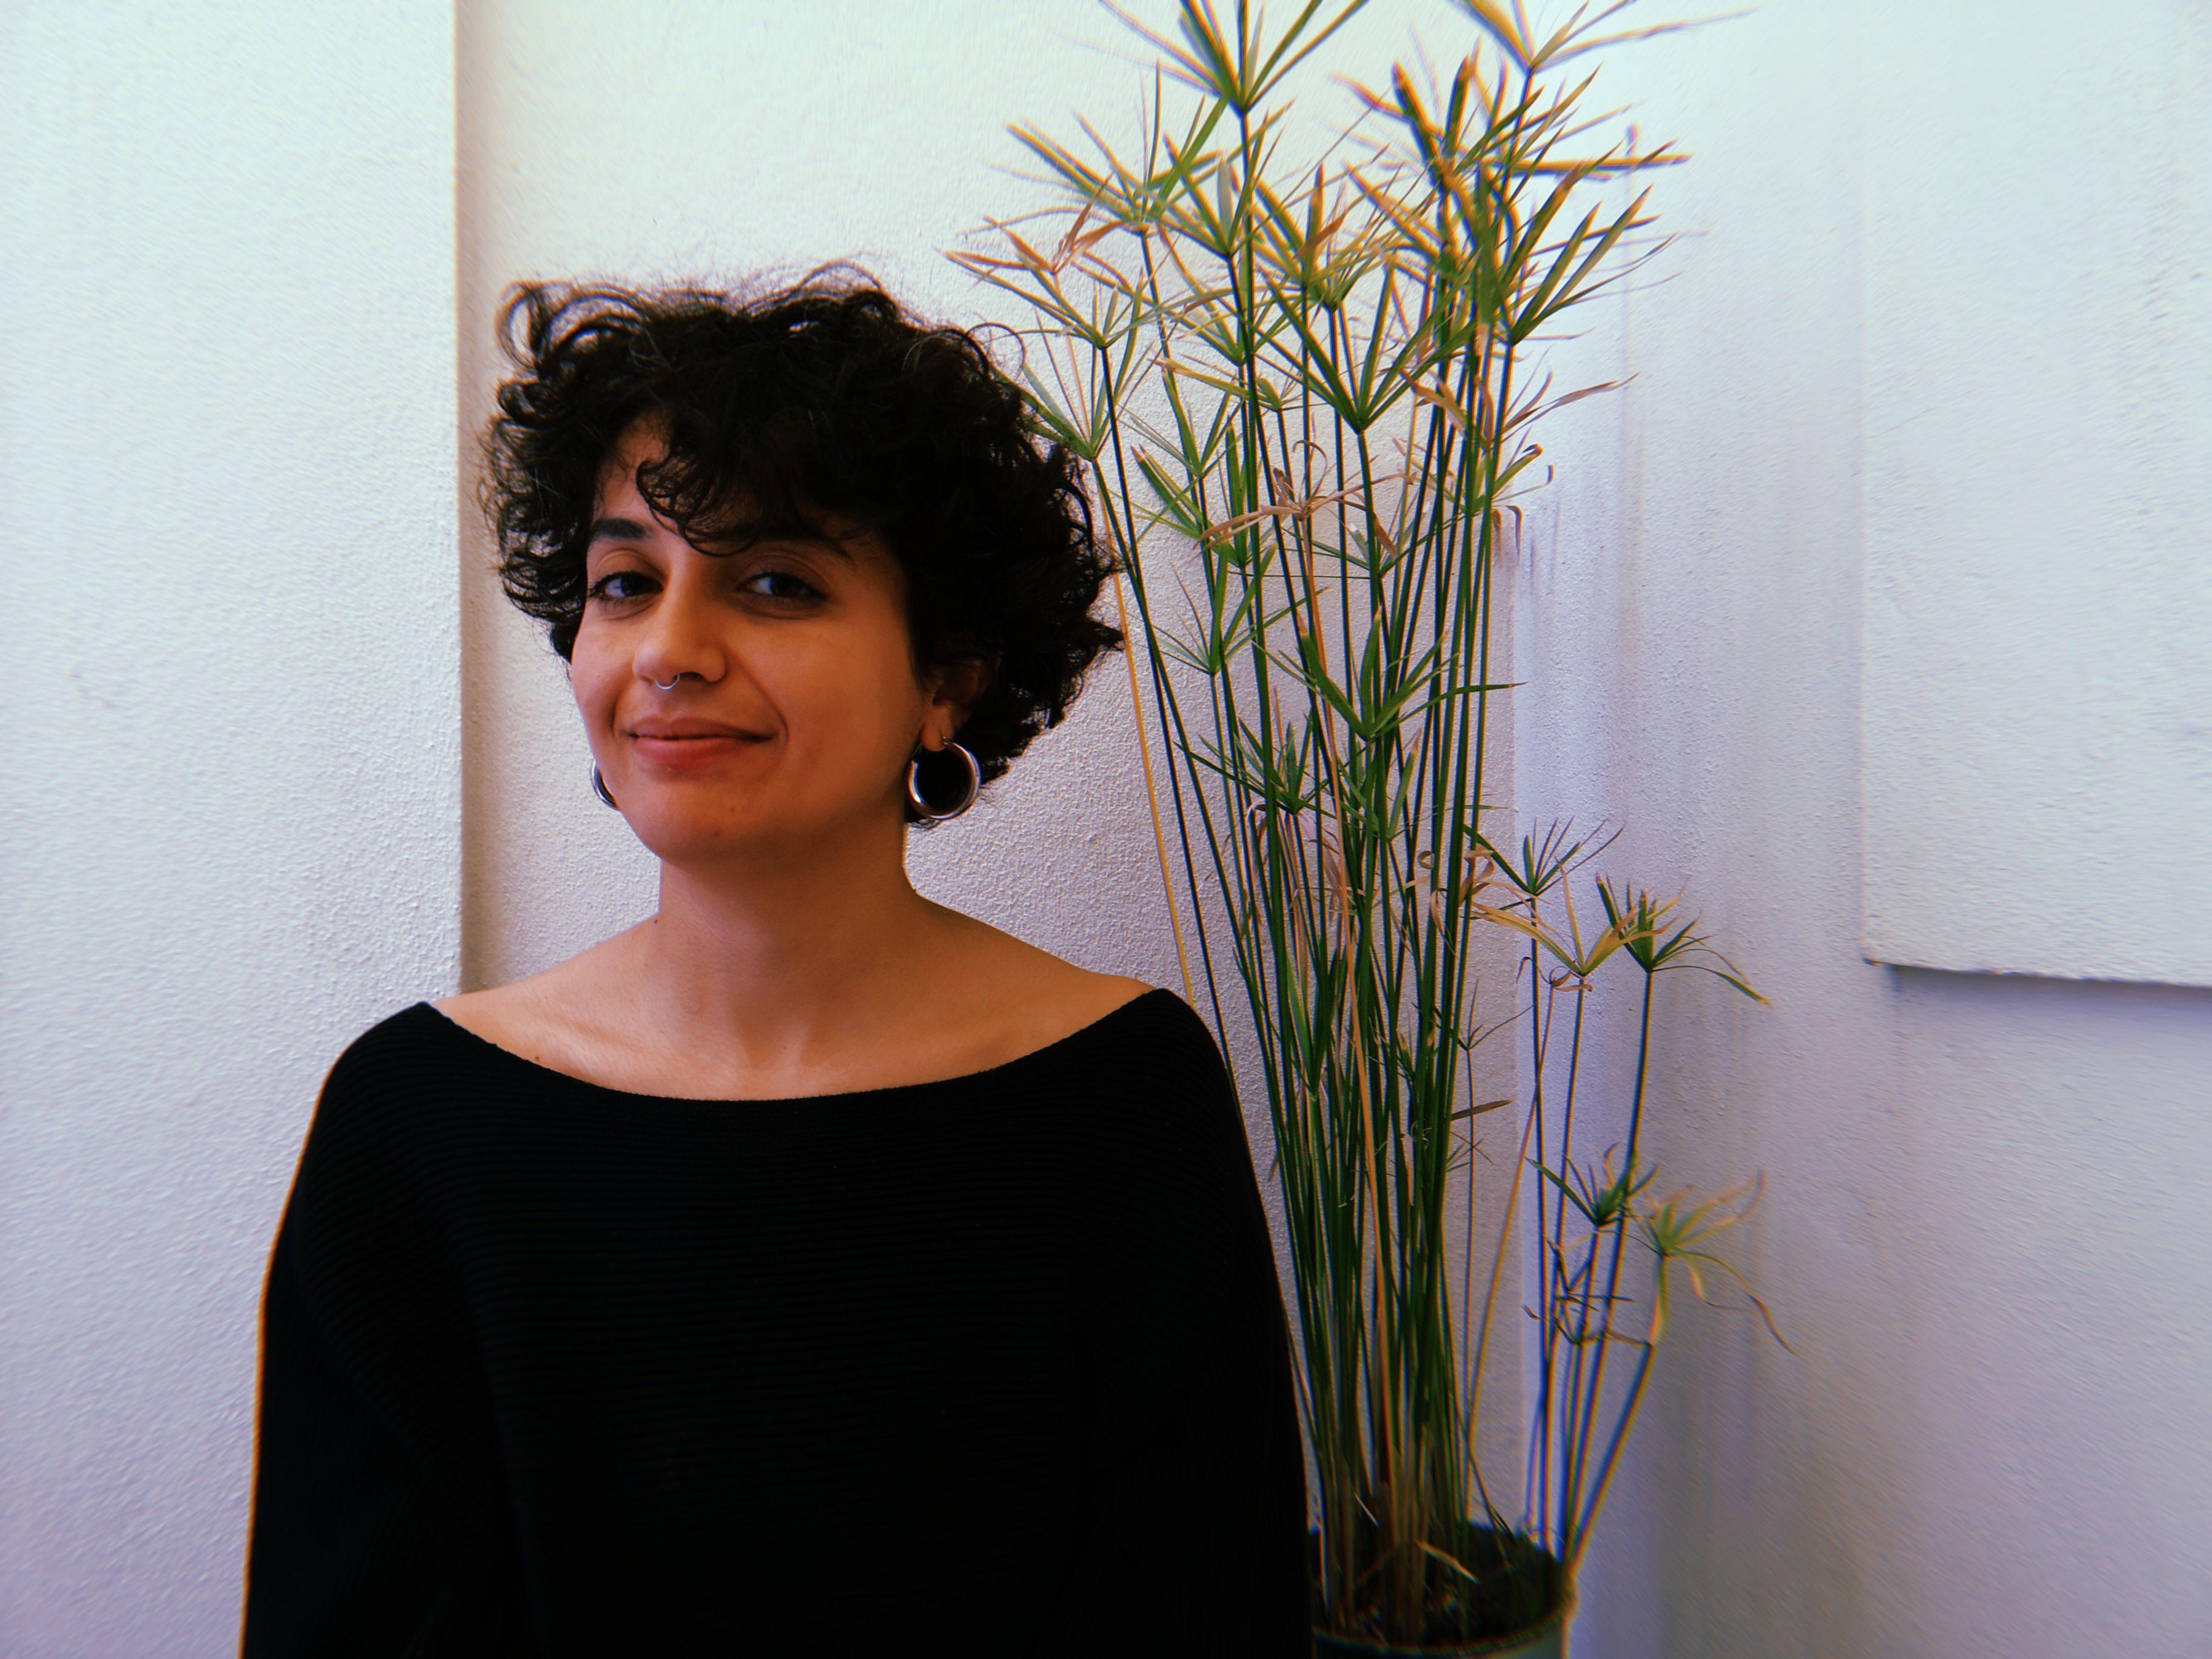 Aylin Cankaya is standing in white room with a plant in the background. Aylin is smiling into the camera, wearing earrings. Aylin has short curly hair.